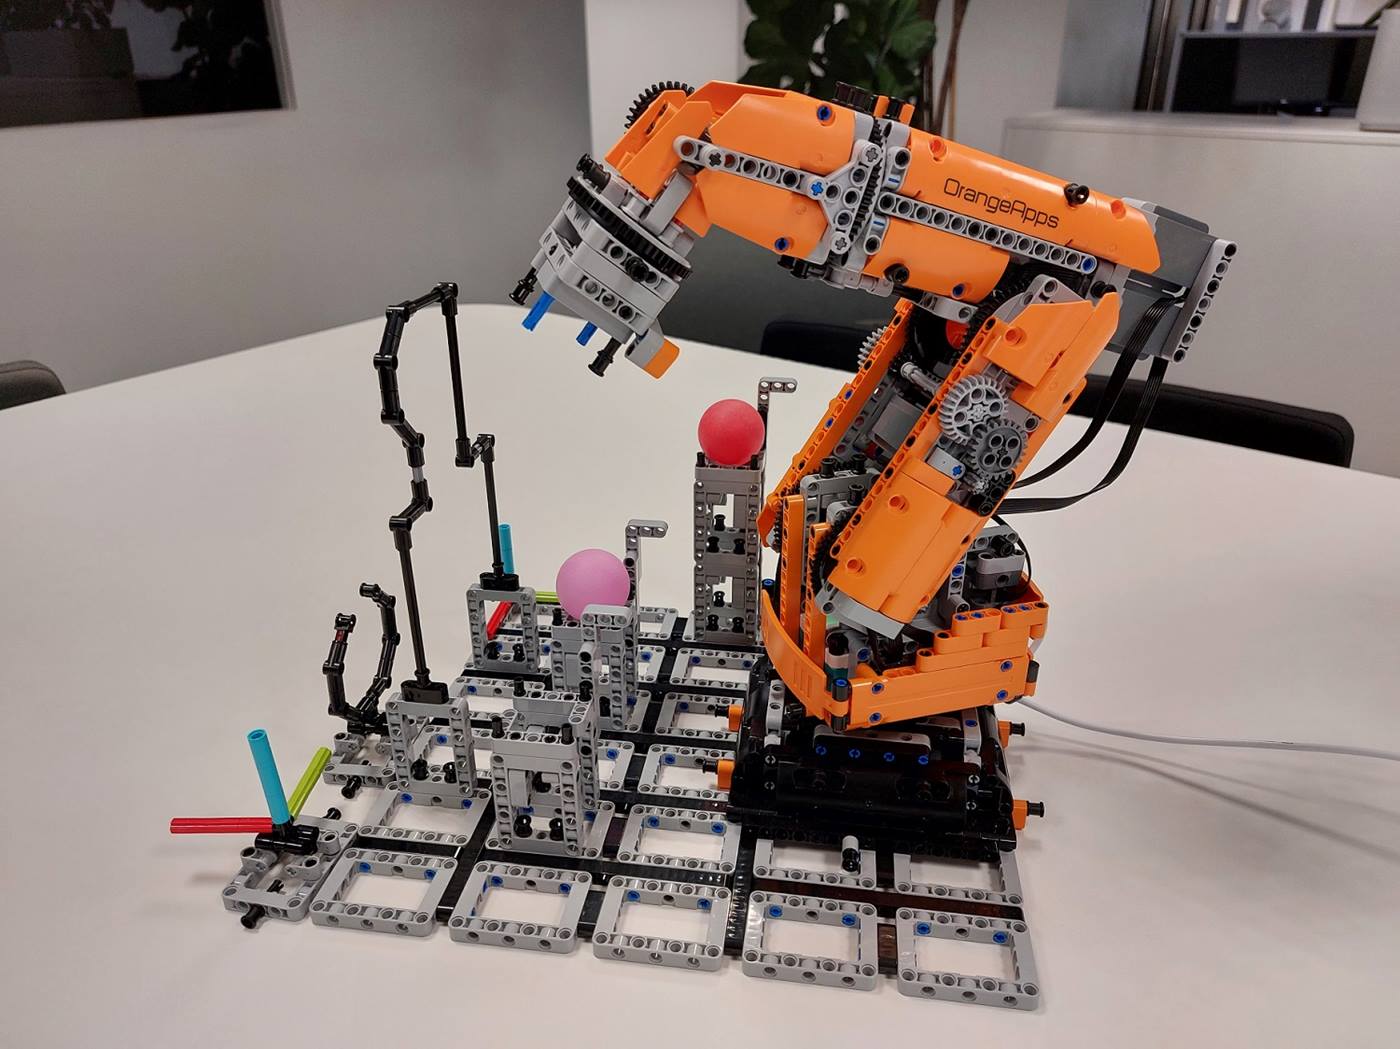 Building block robot from OrangeApps that can be programmed with KUKA.Sim 4.x